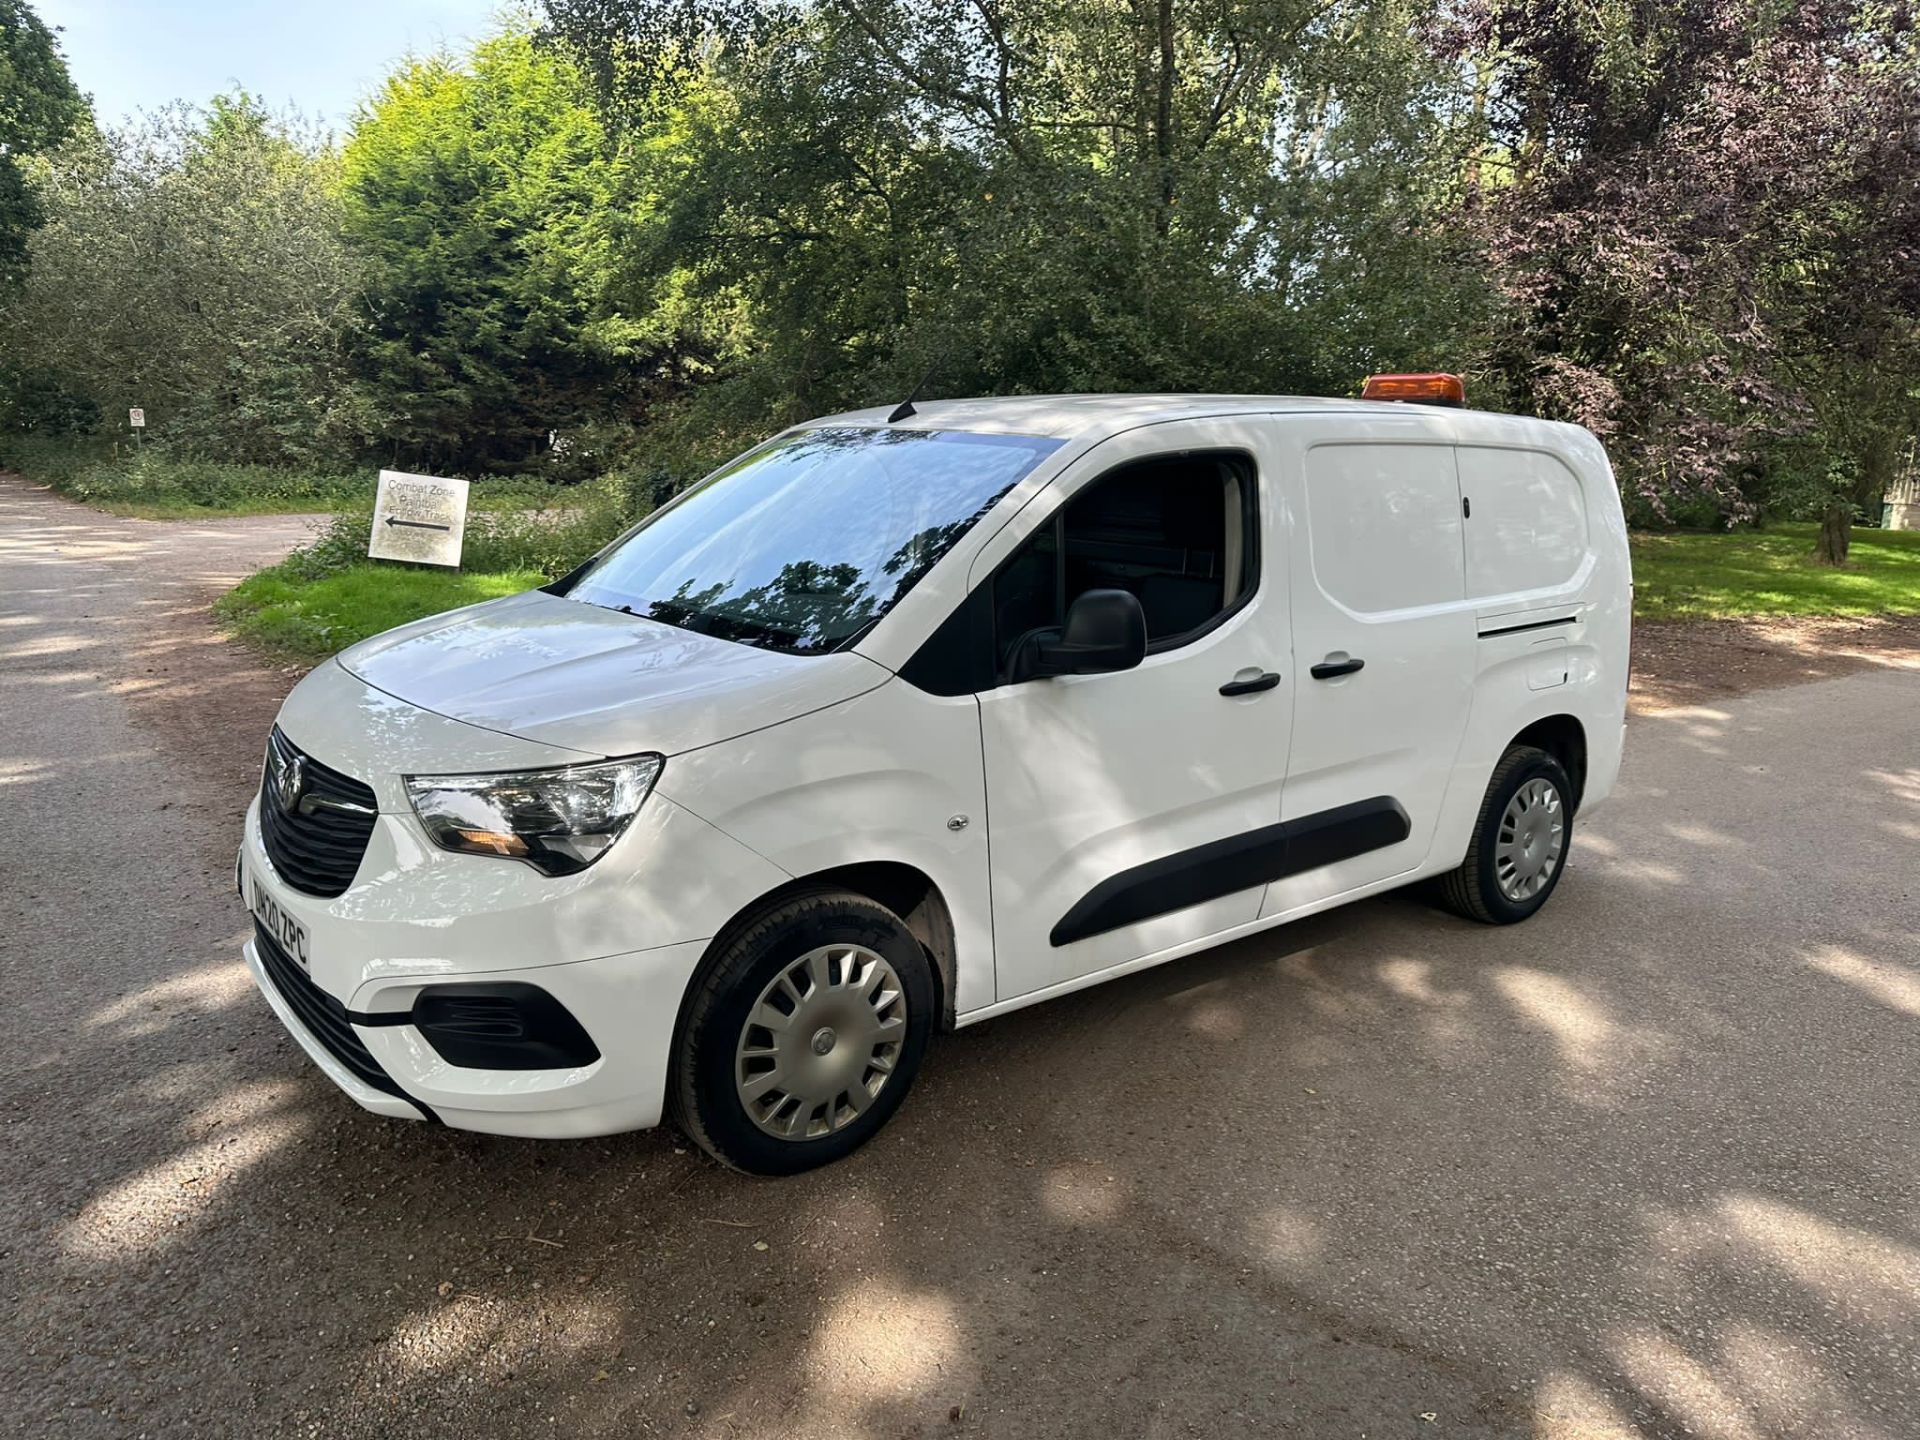 2020 20 Vauxhall combo sportive Panel van - 73k miles - Euro 6 - Lwb - Air con - ply lined - Image 3 of 10